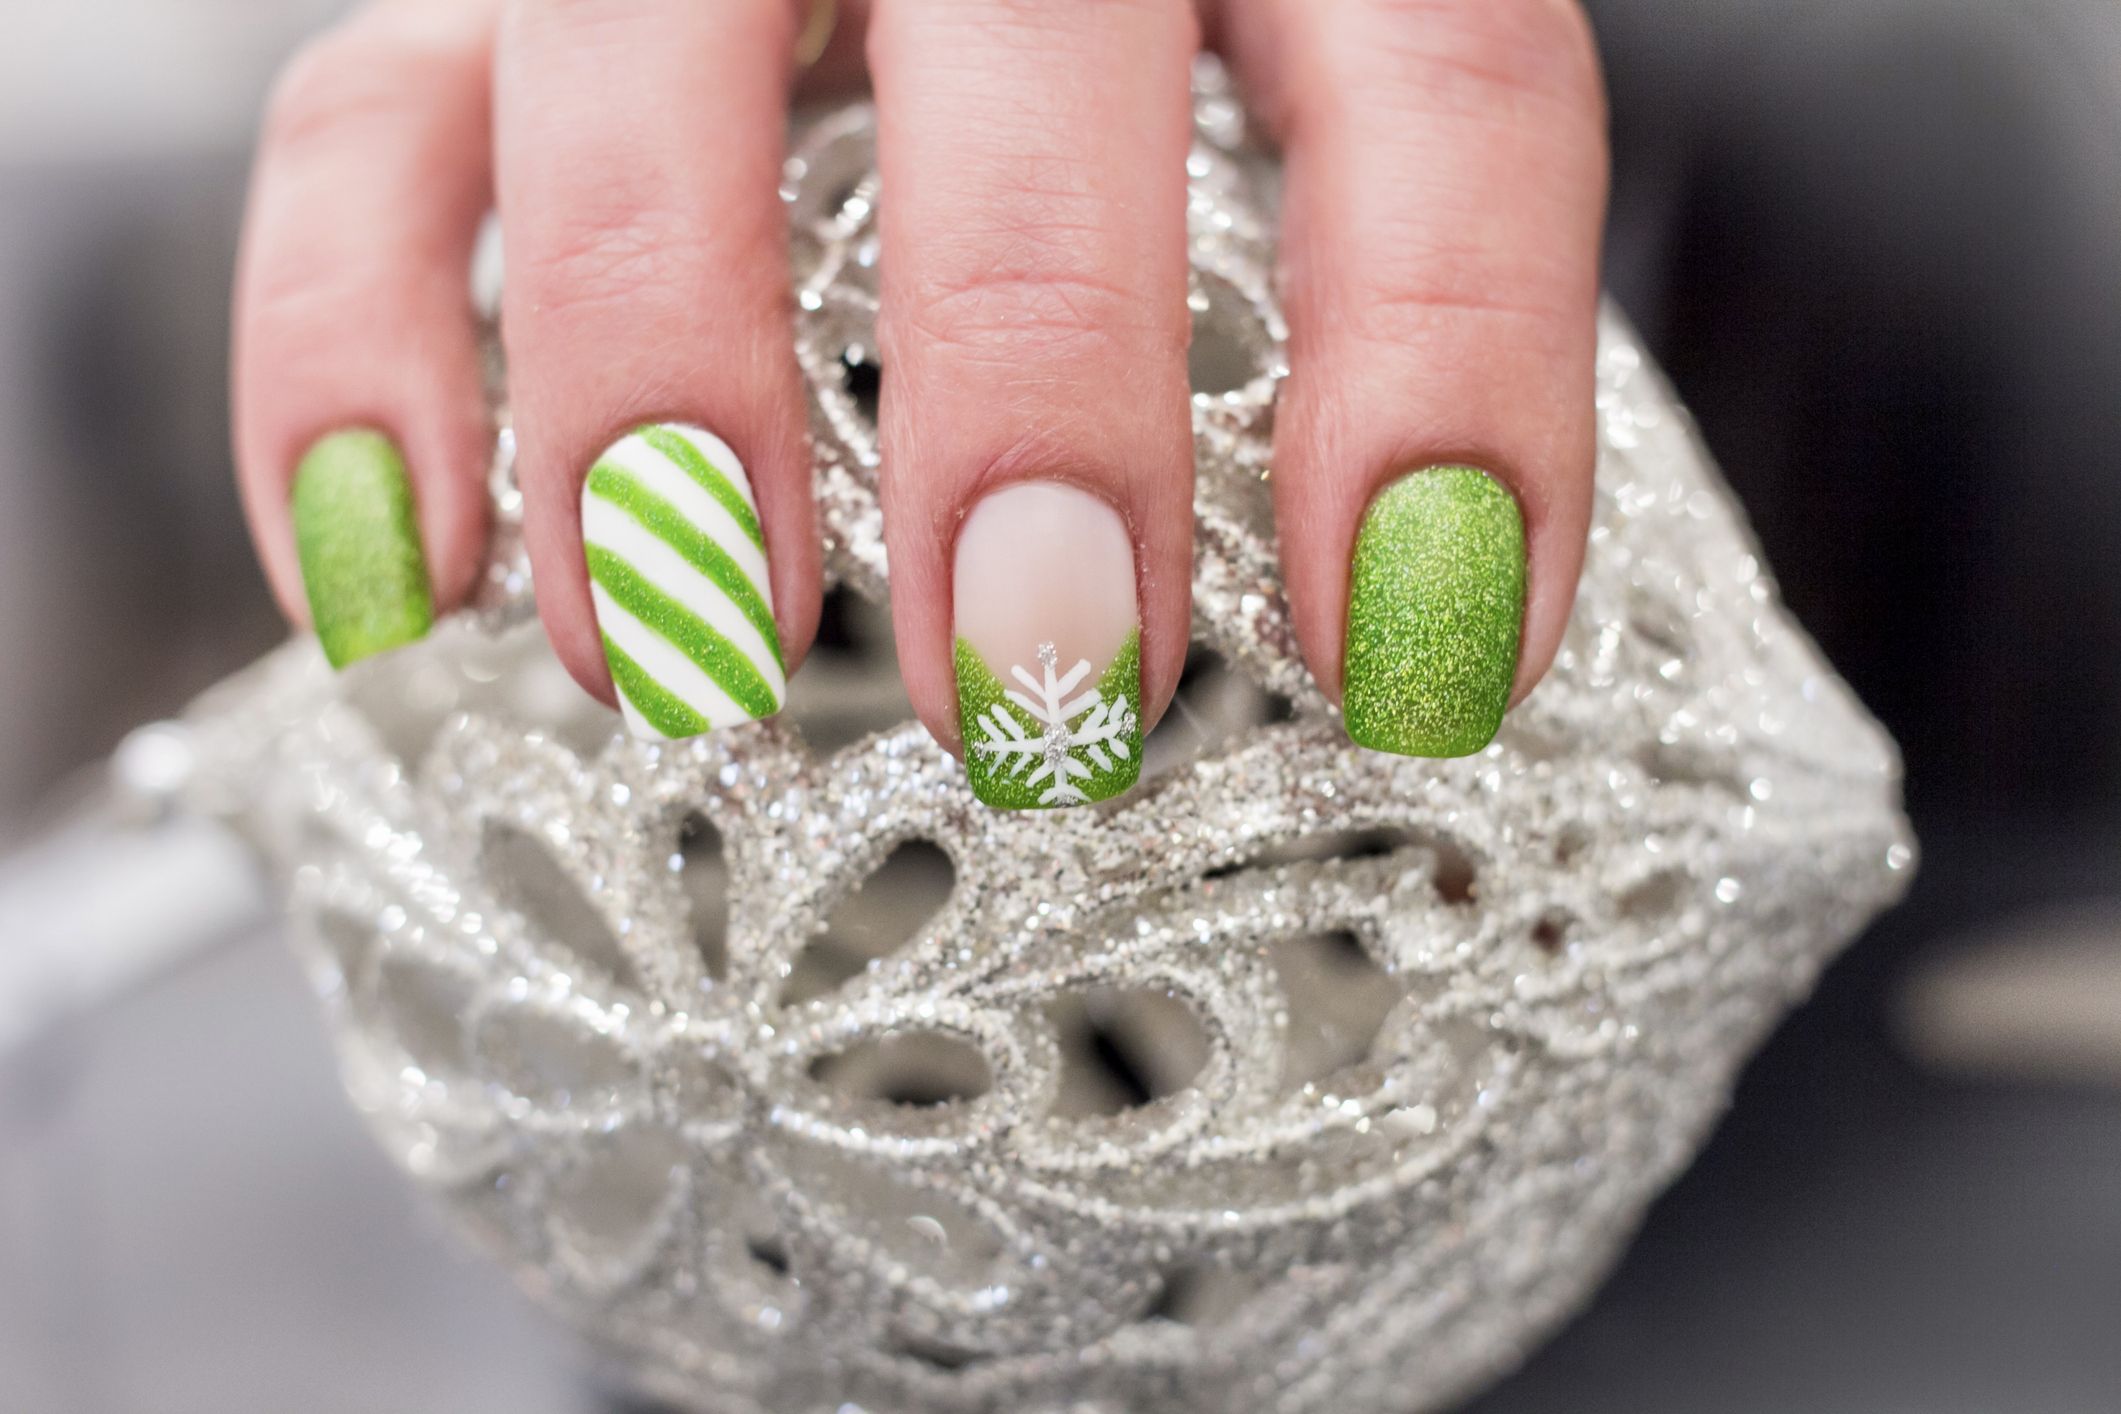 10 Unique and Festive Christmas Nail Designs 2021 on Pinterest – Get ...